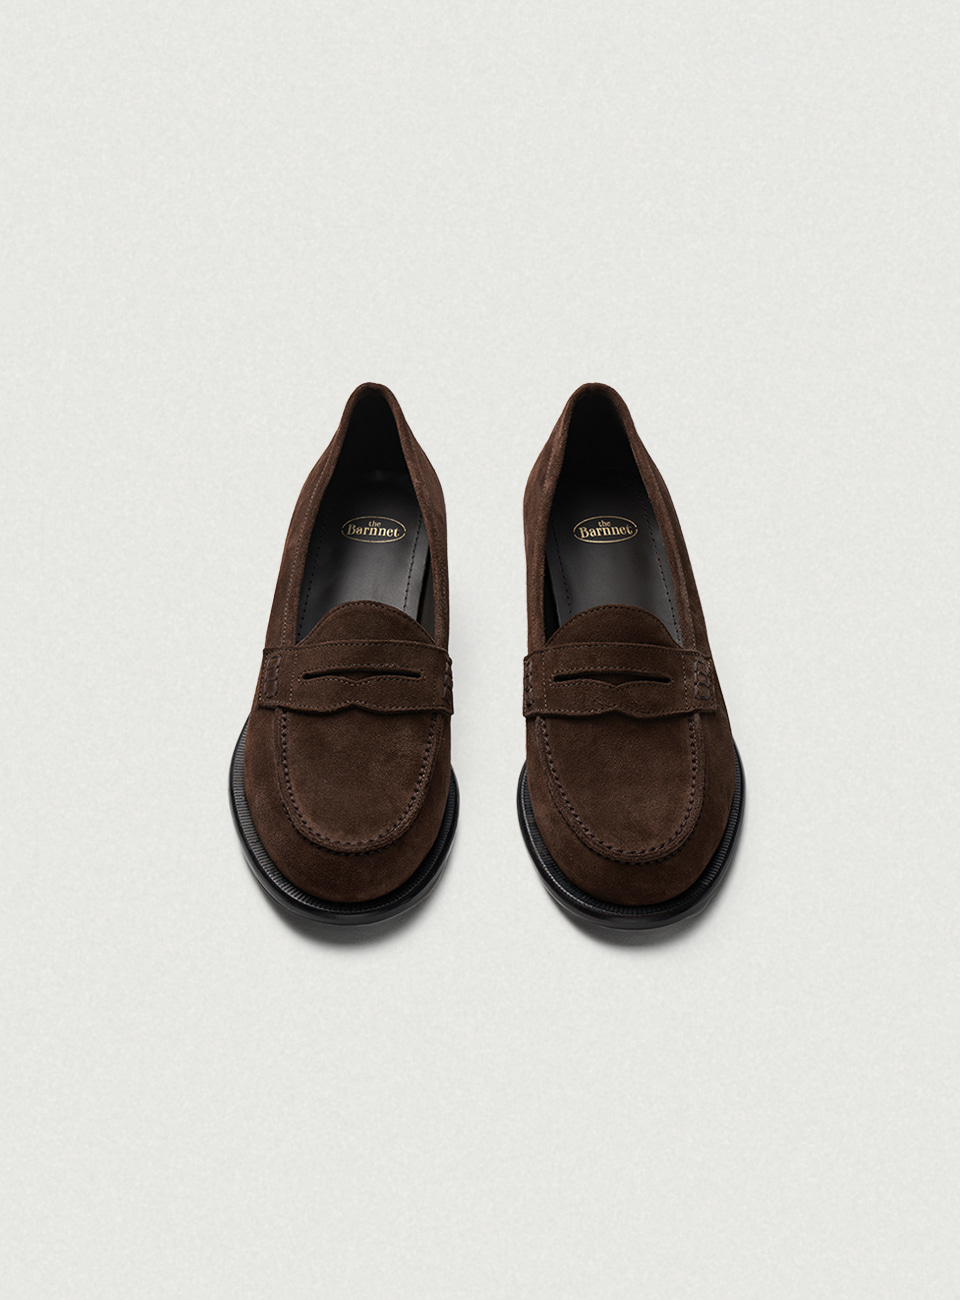 Brown Suede Penny Loafers by GRUPPO MASTROTTO